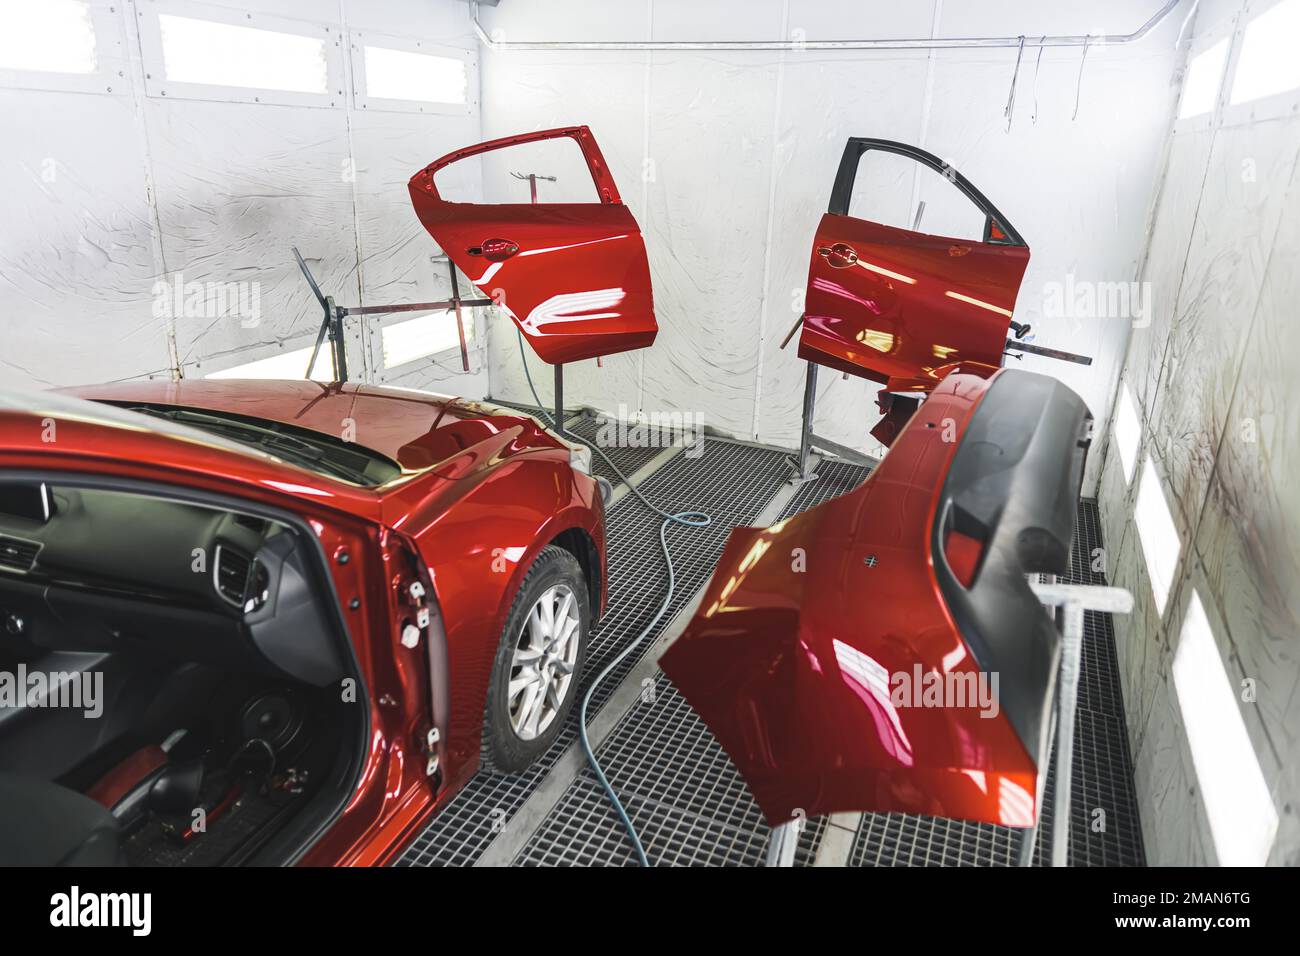 A luxury red car in a paint shop with its doors removed for a fresh coat of paint. High-quality photo Stock Photo